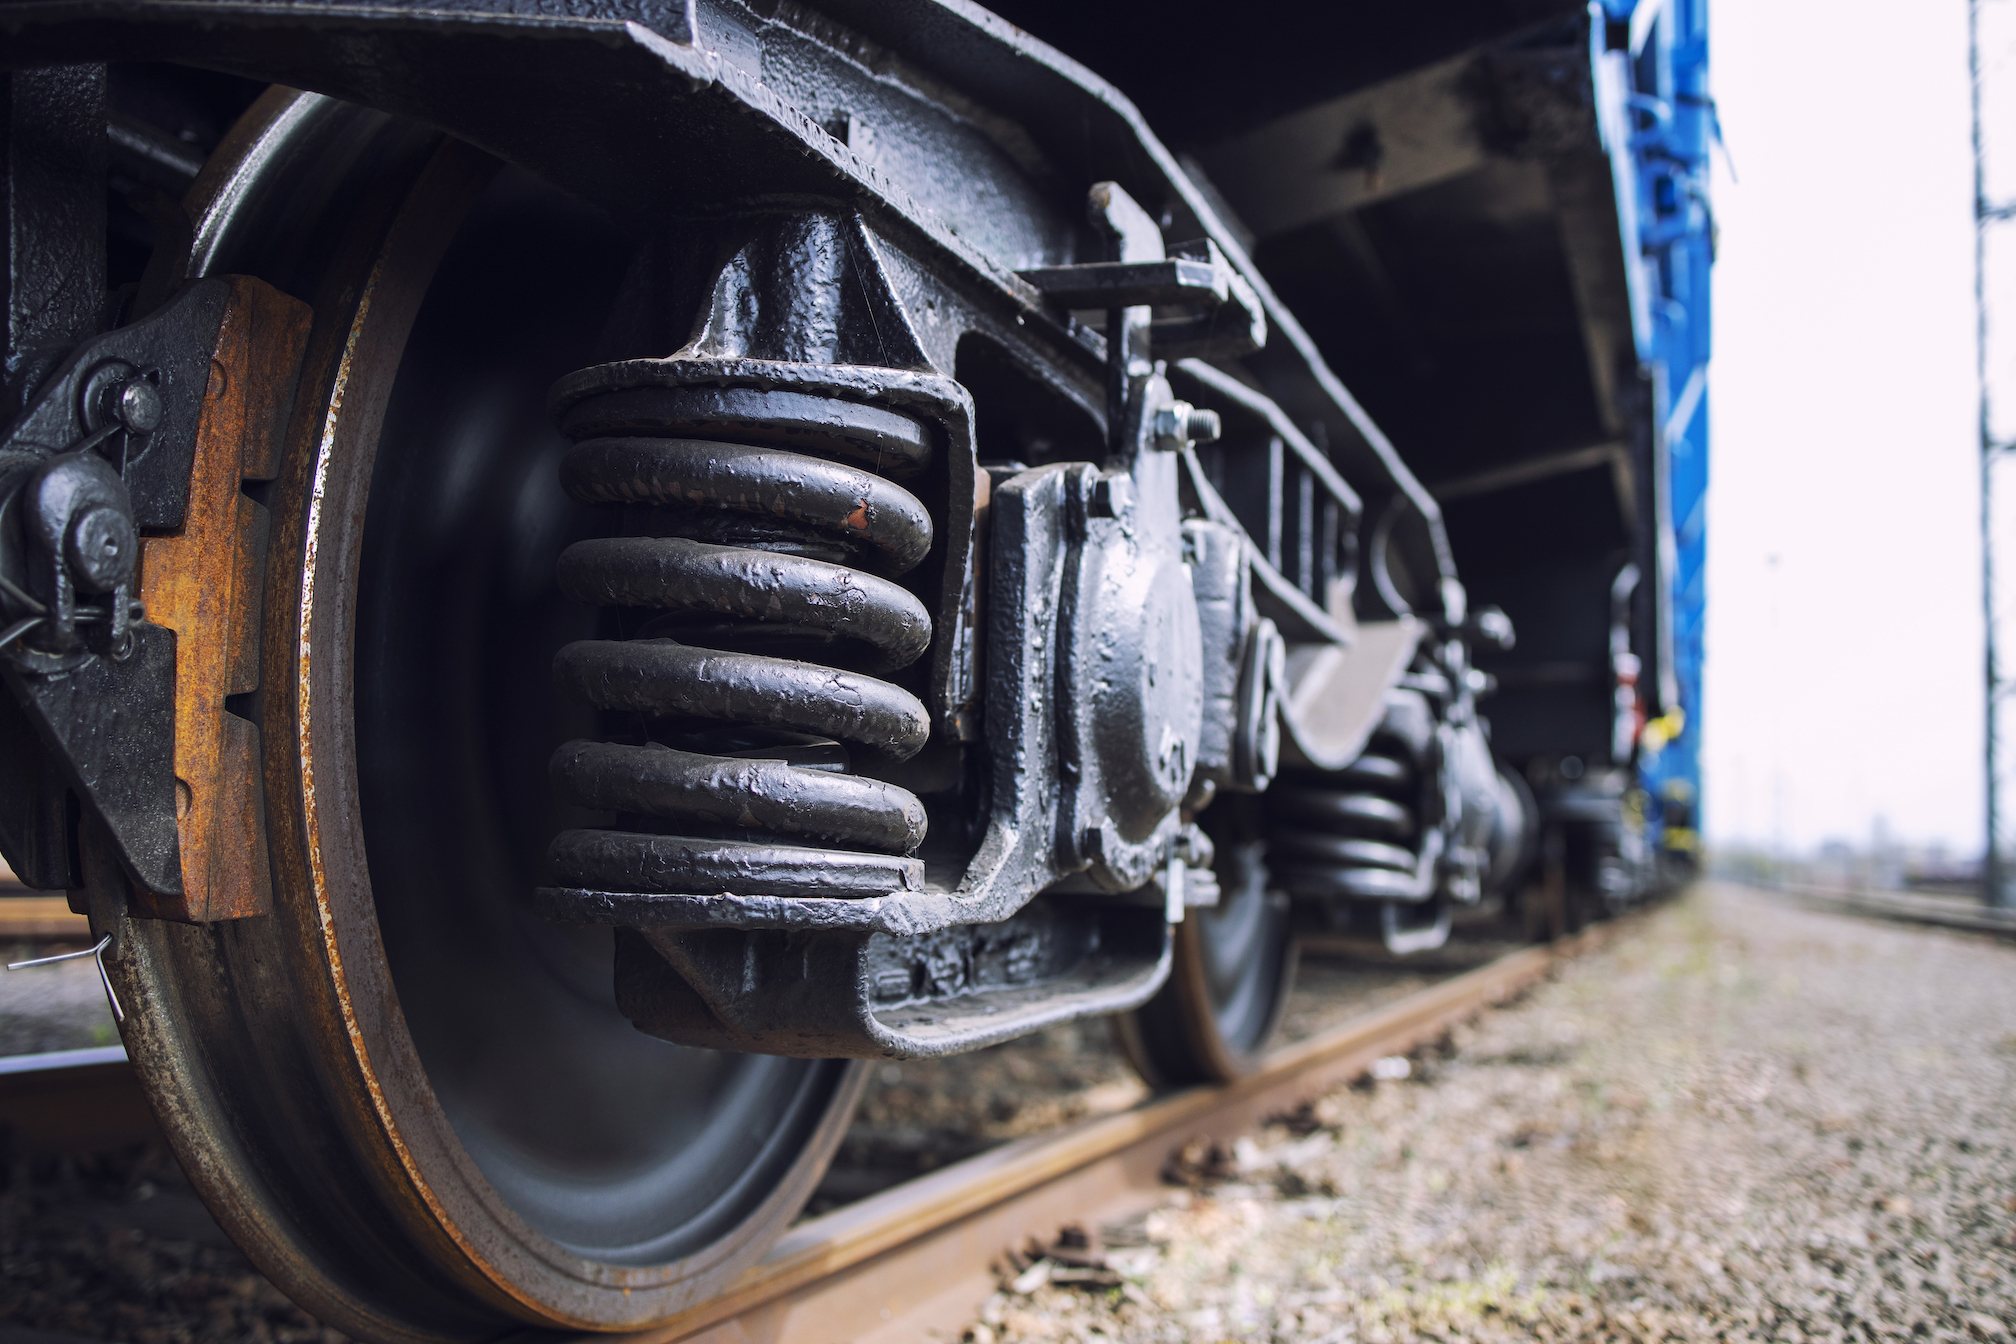 Closeup view of train wheels on track.